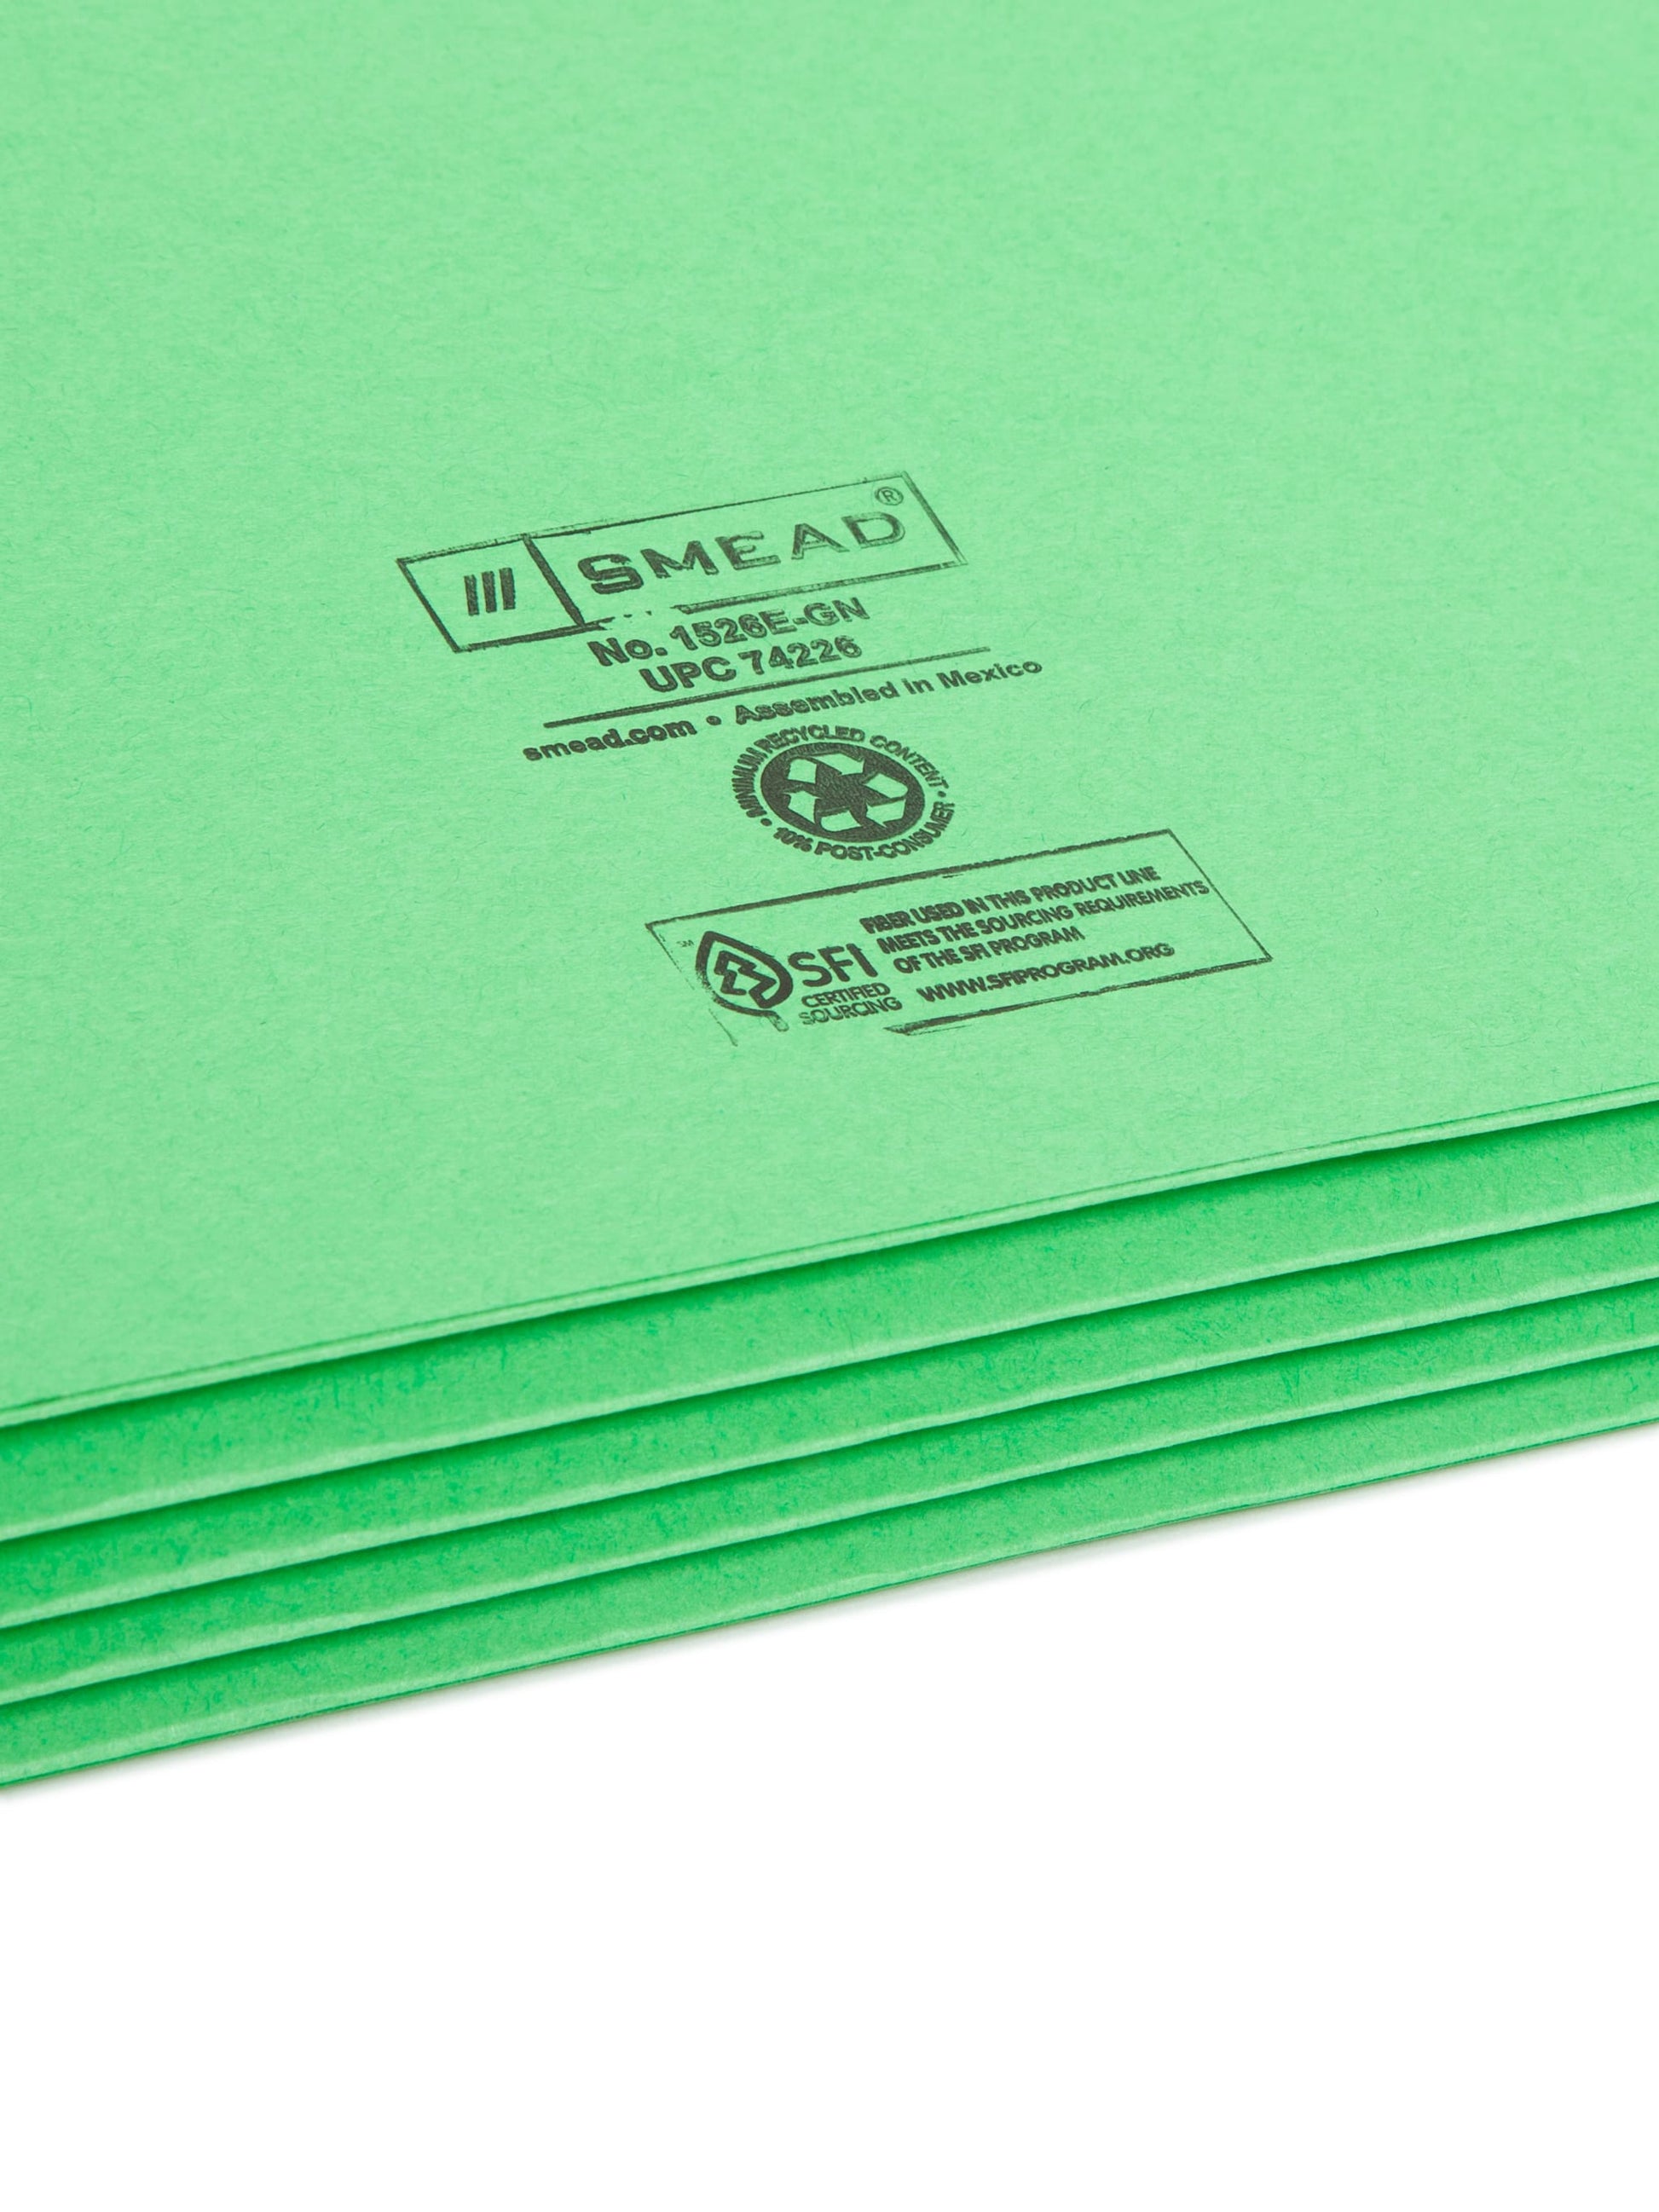 File Pockets, 3-1/2 inch Expansion, Straight-Cut Tab, Green Color, Legal Size, Set of 0, 30086486742260